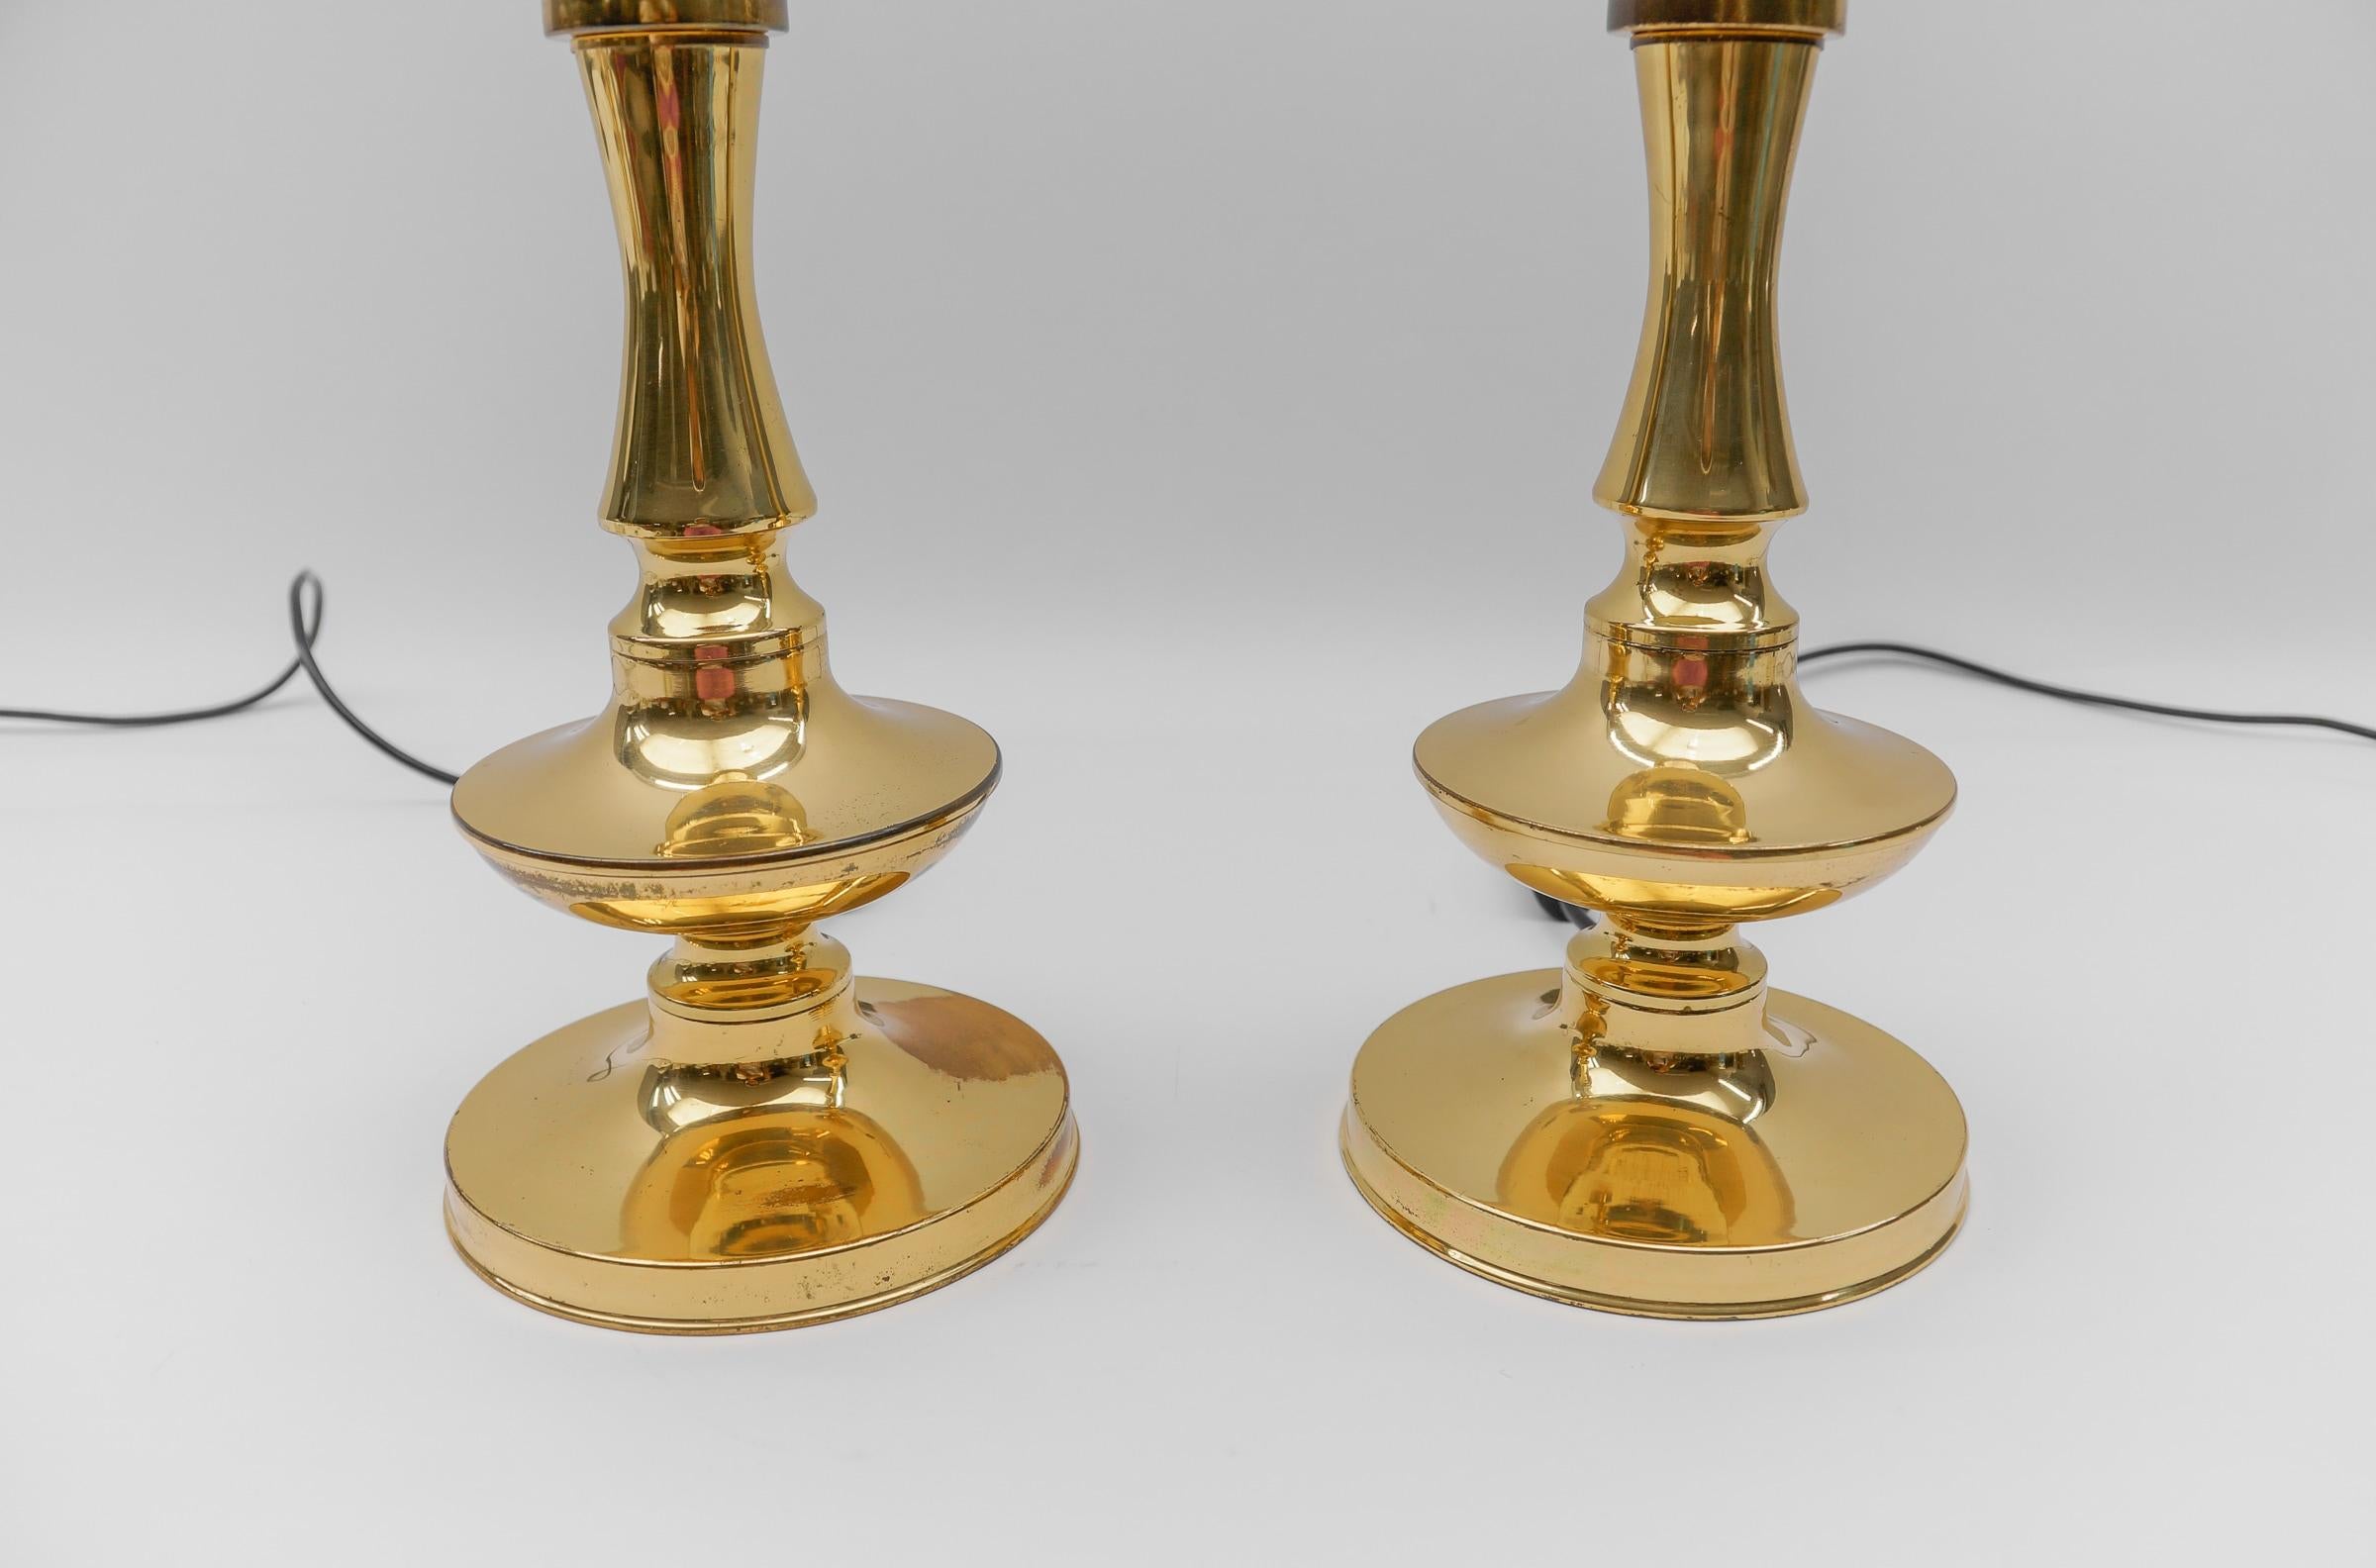 Pair of Mid Century Modern Brass Table Lamp Bases, 1960s For Sale 4